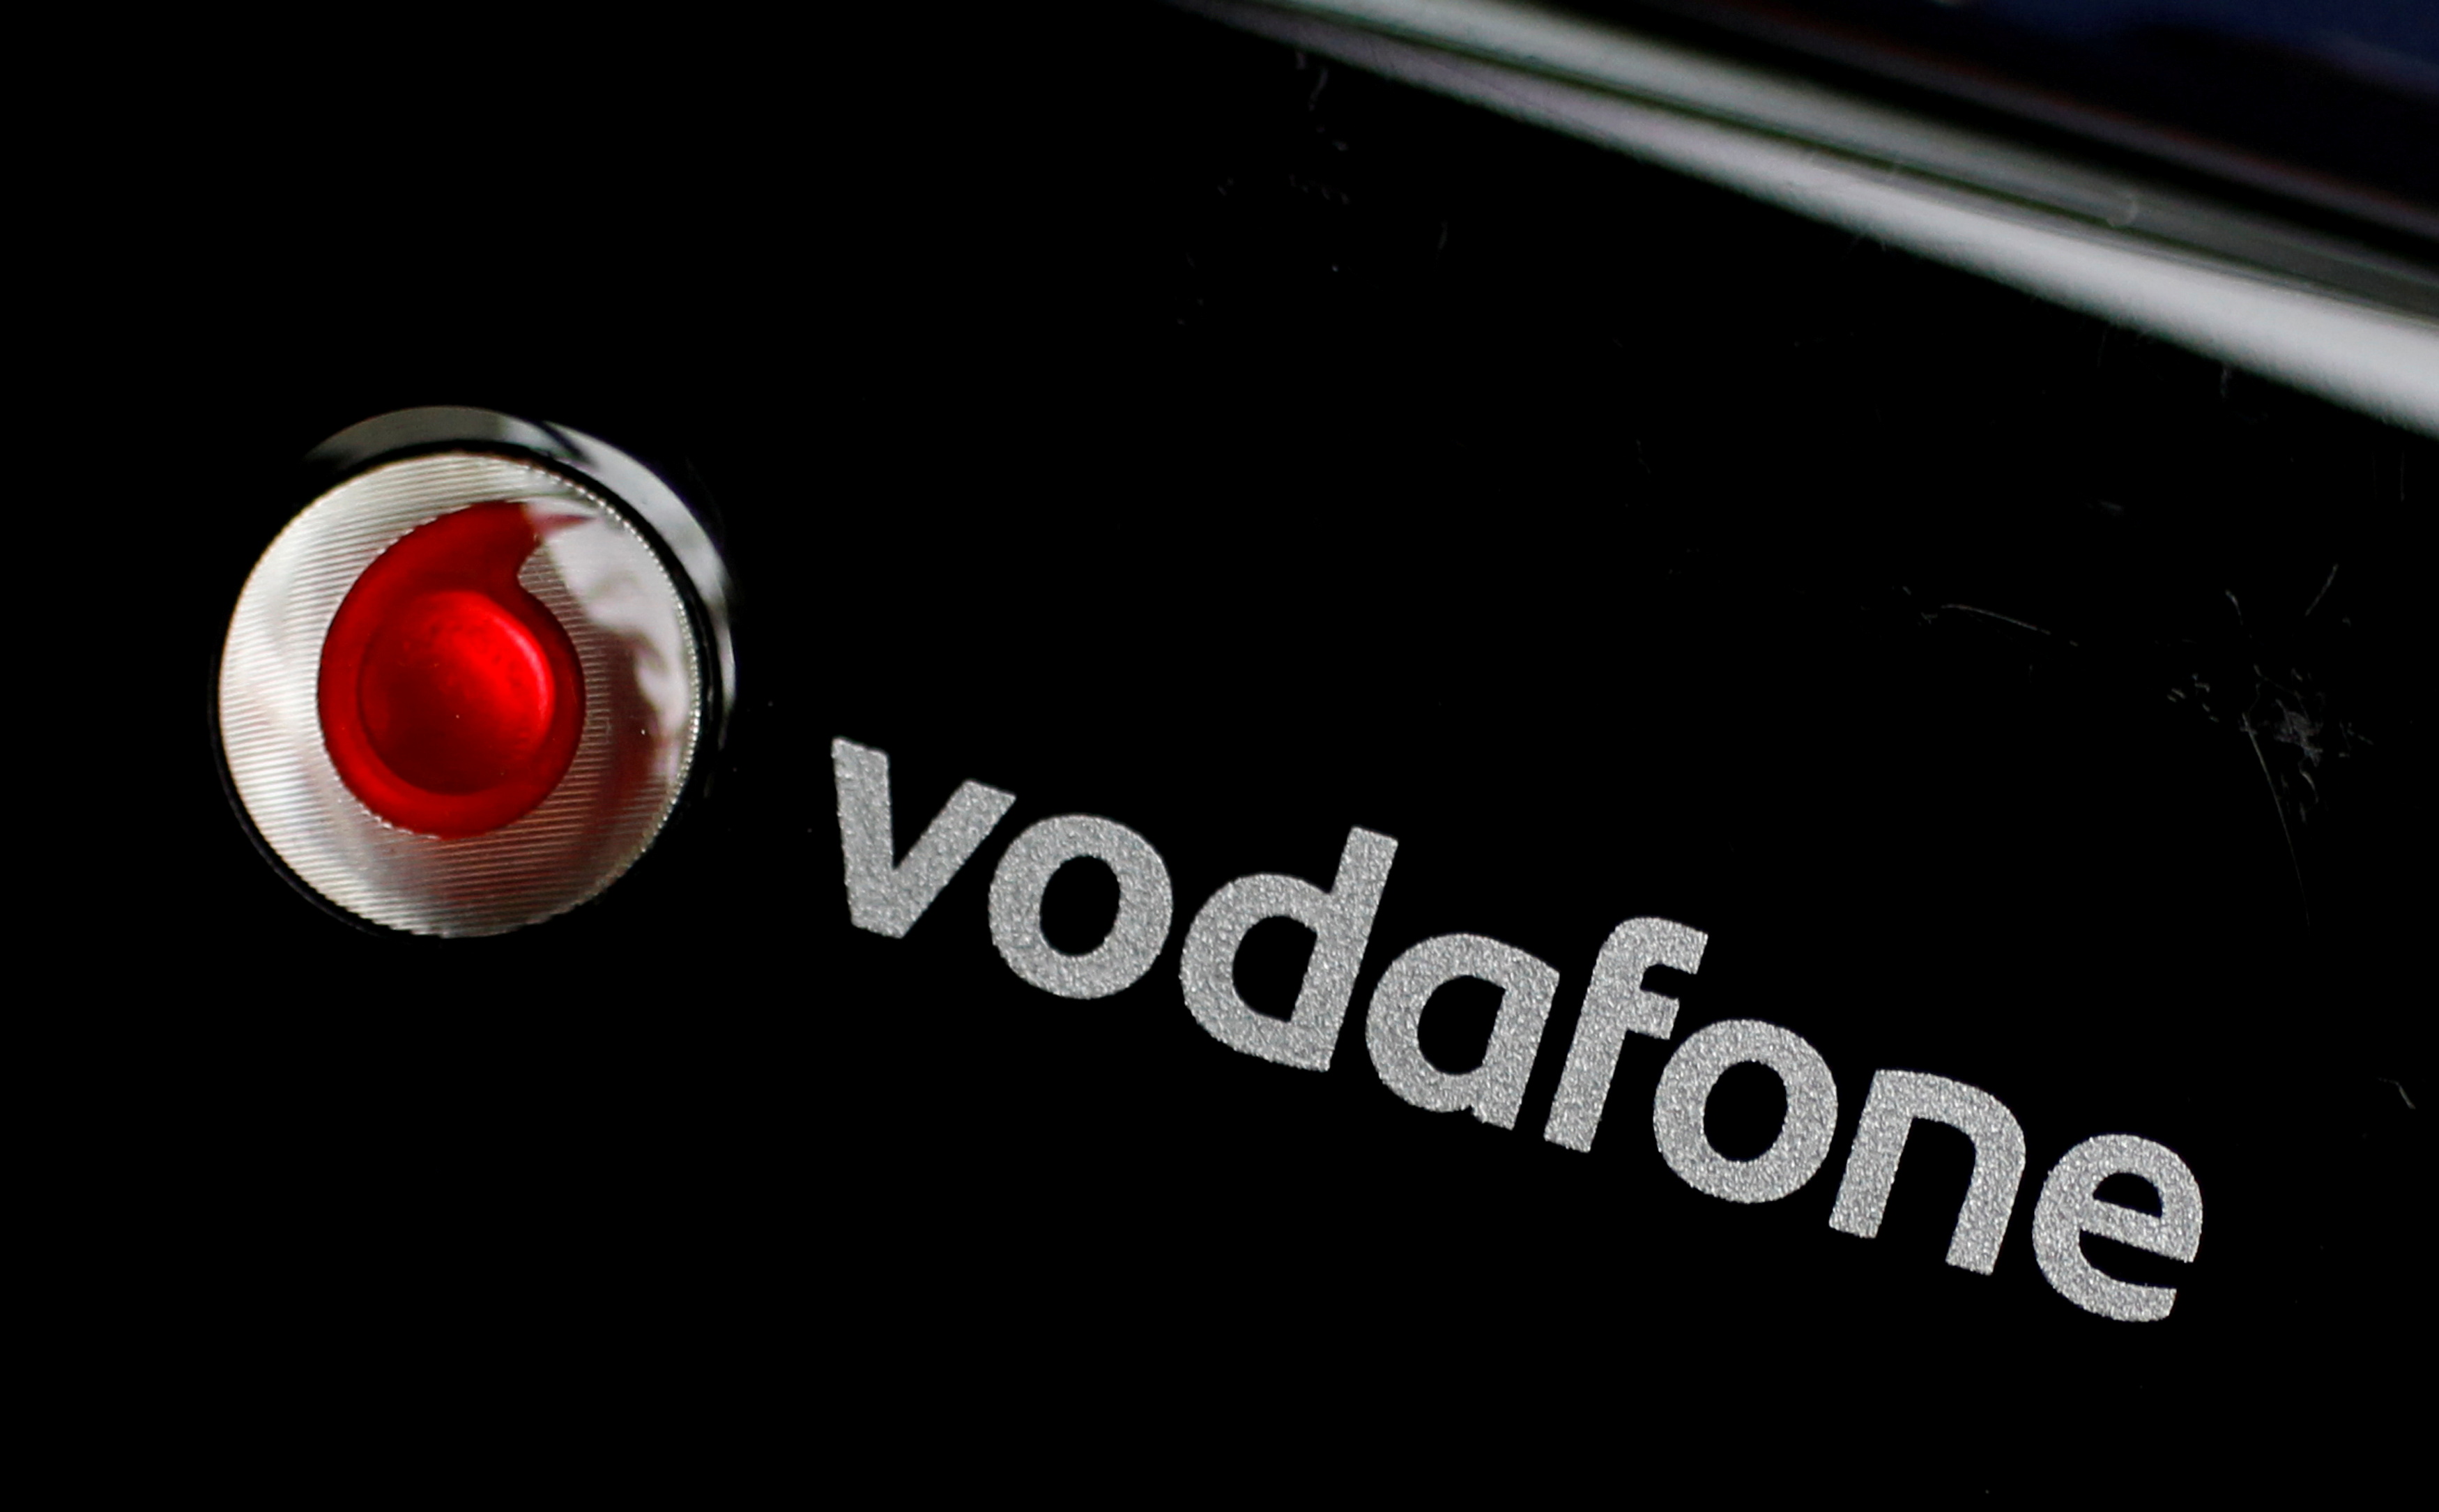 A Vodafone logo is seen on a mobile internet dongle in this photo illustration